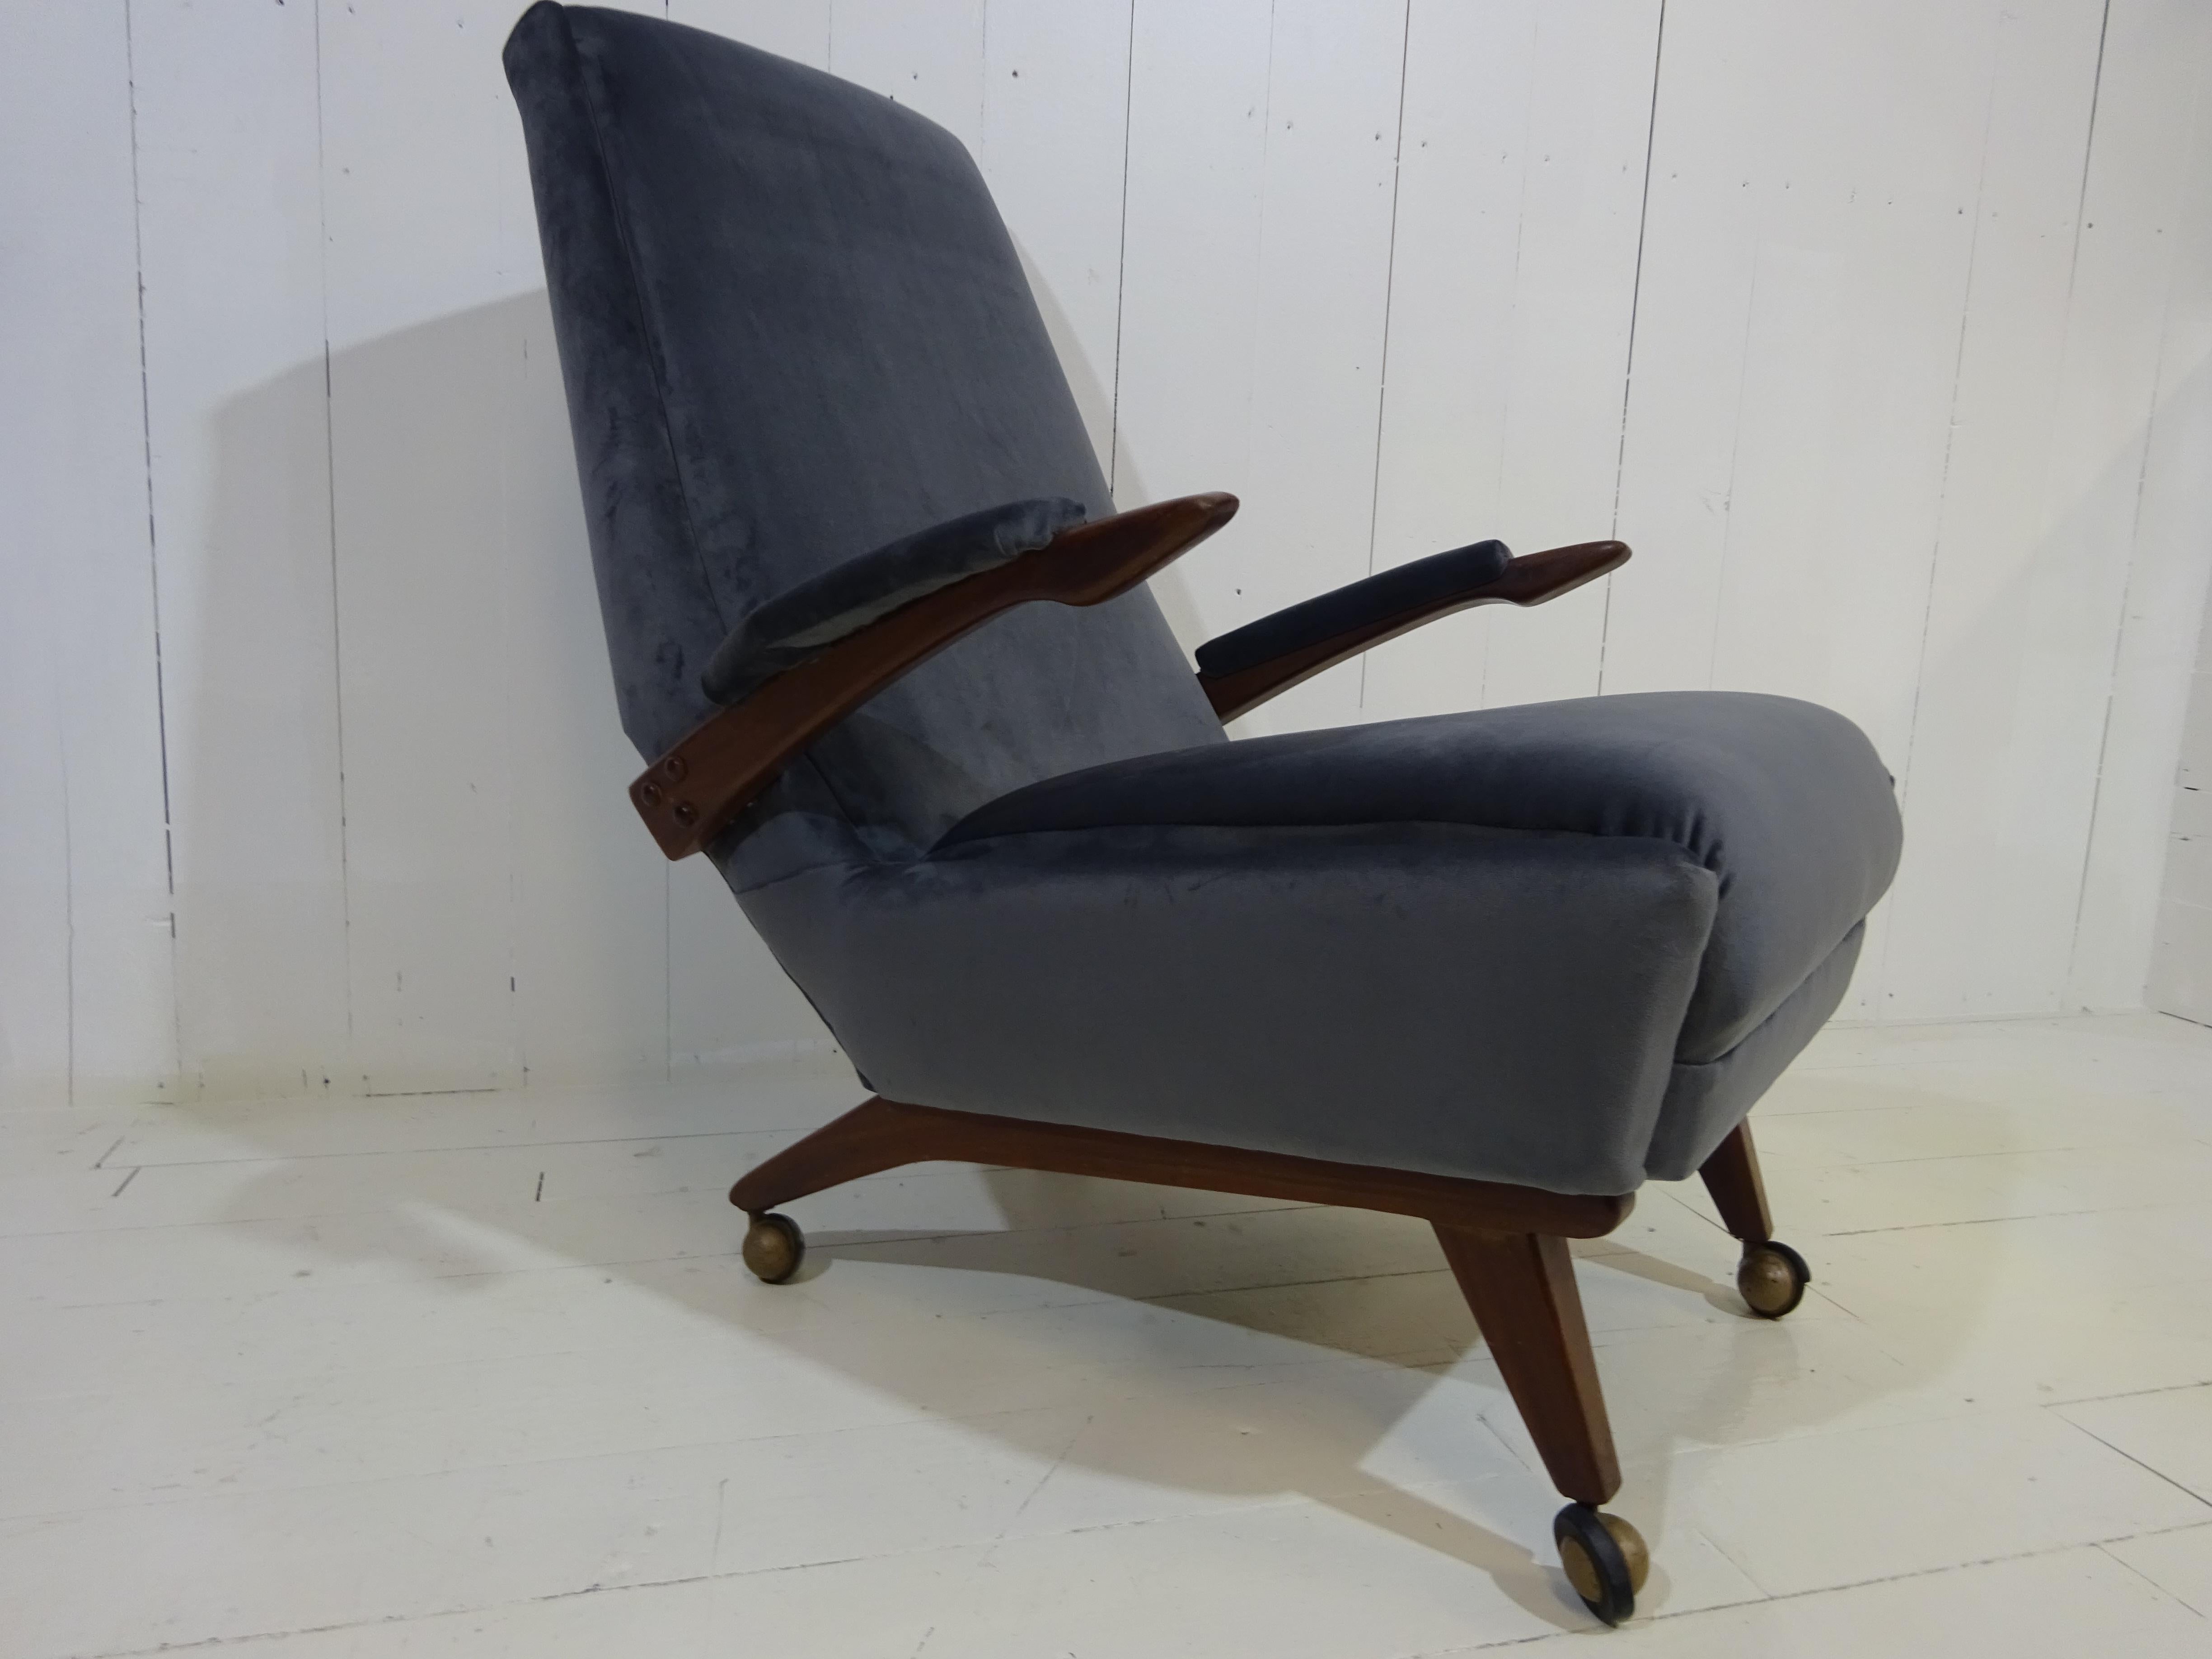 Mid Century Lounge chair by Greaves and Thomas

An icon of modern design and a true statement piece for any home. 

Designed and manufactured by Greaves and Thomas this chair was ahead of its time in terms of design and gained its influence from